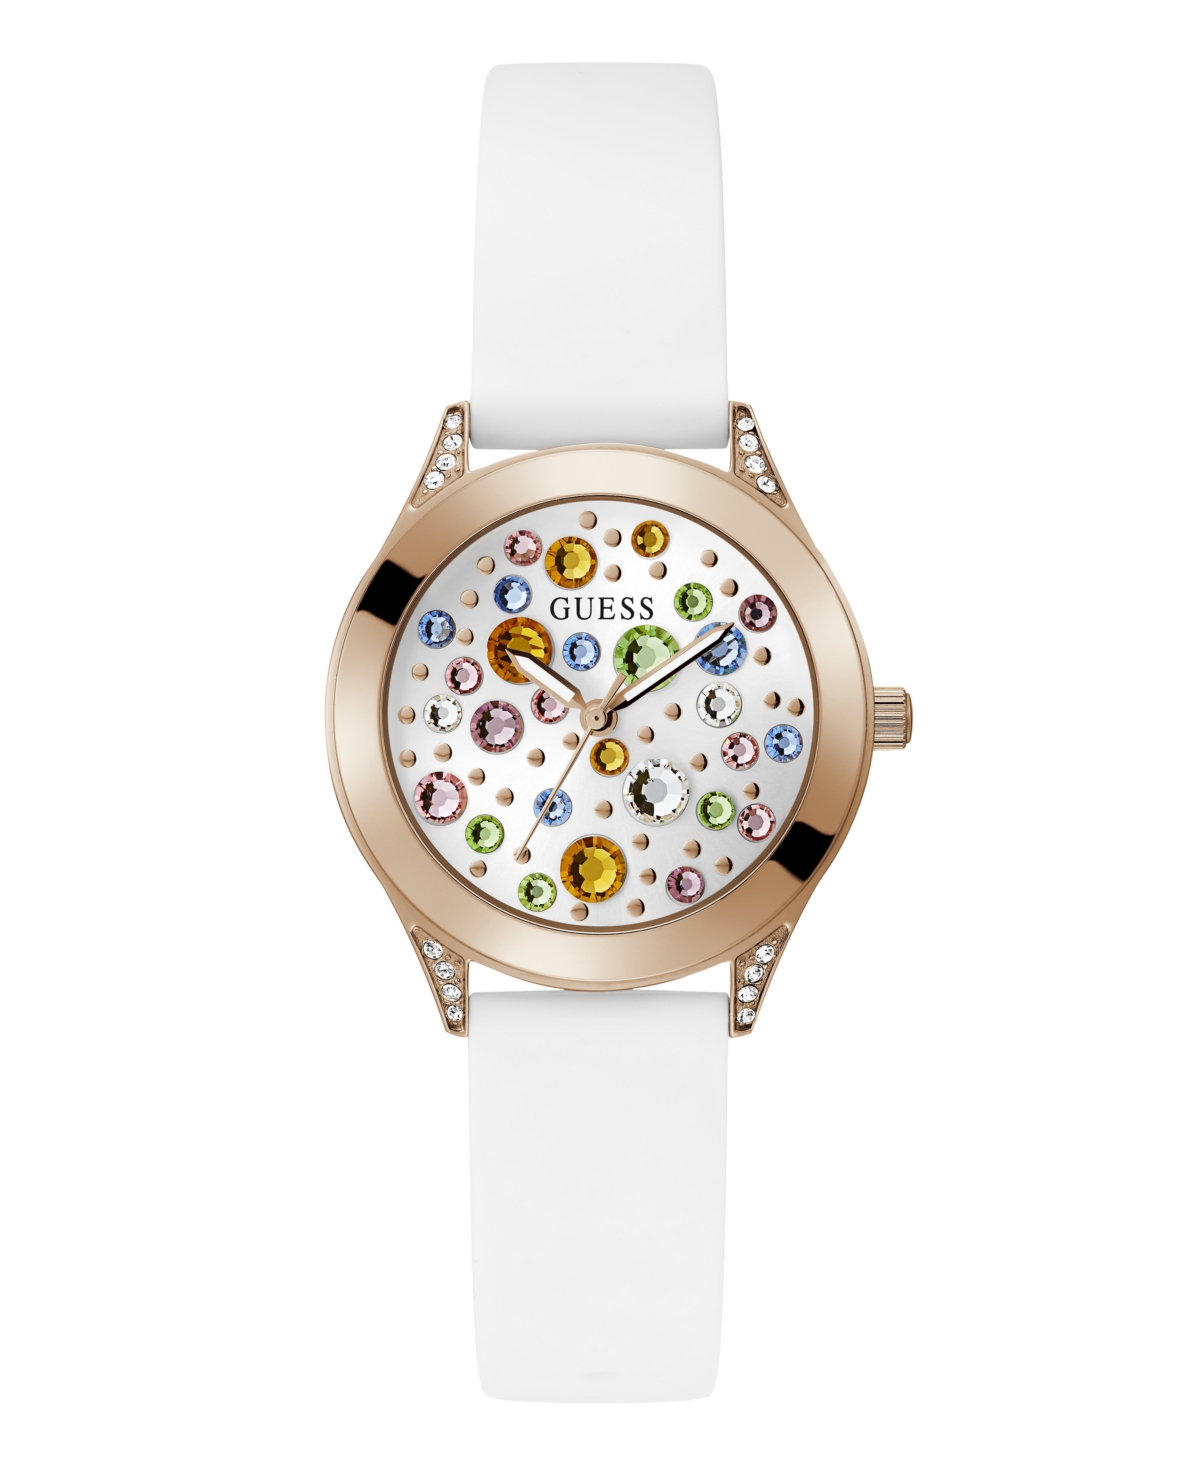 Guess Women's Analog White Silicone Watch 34mm